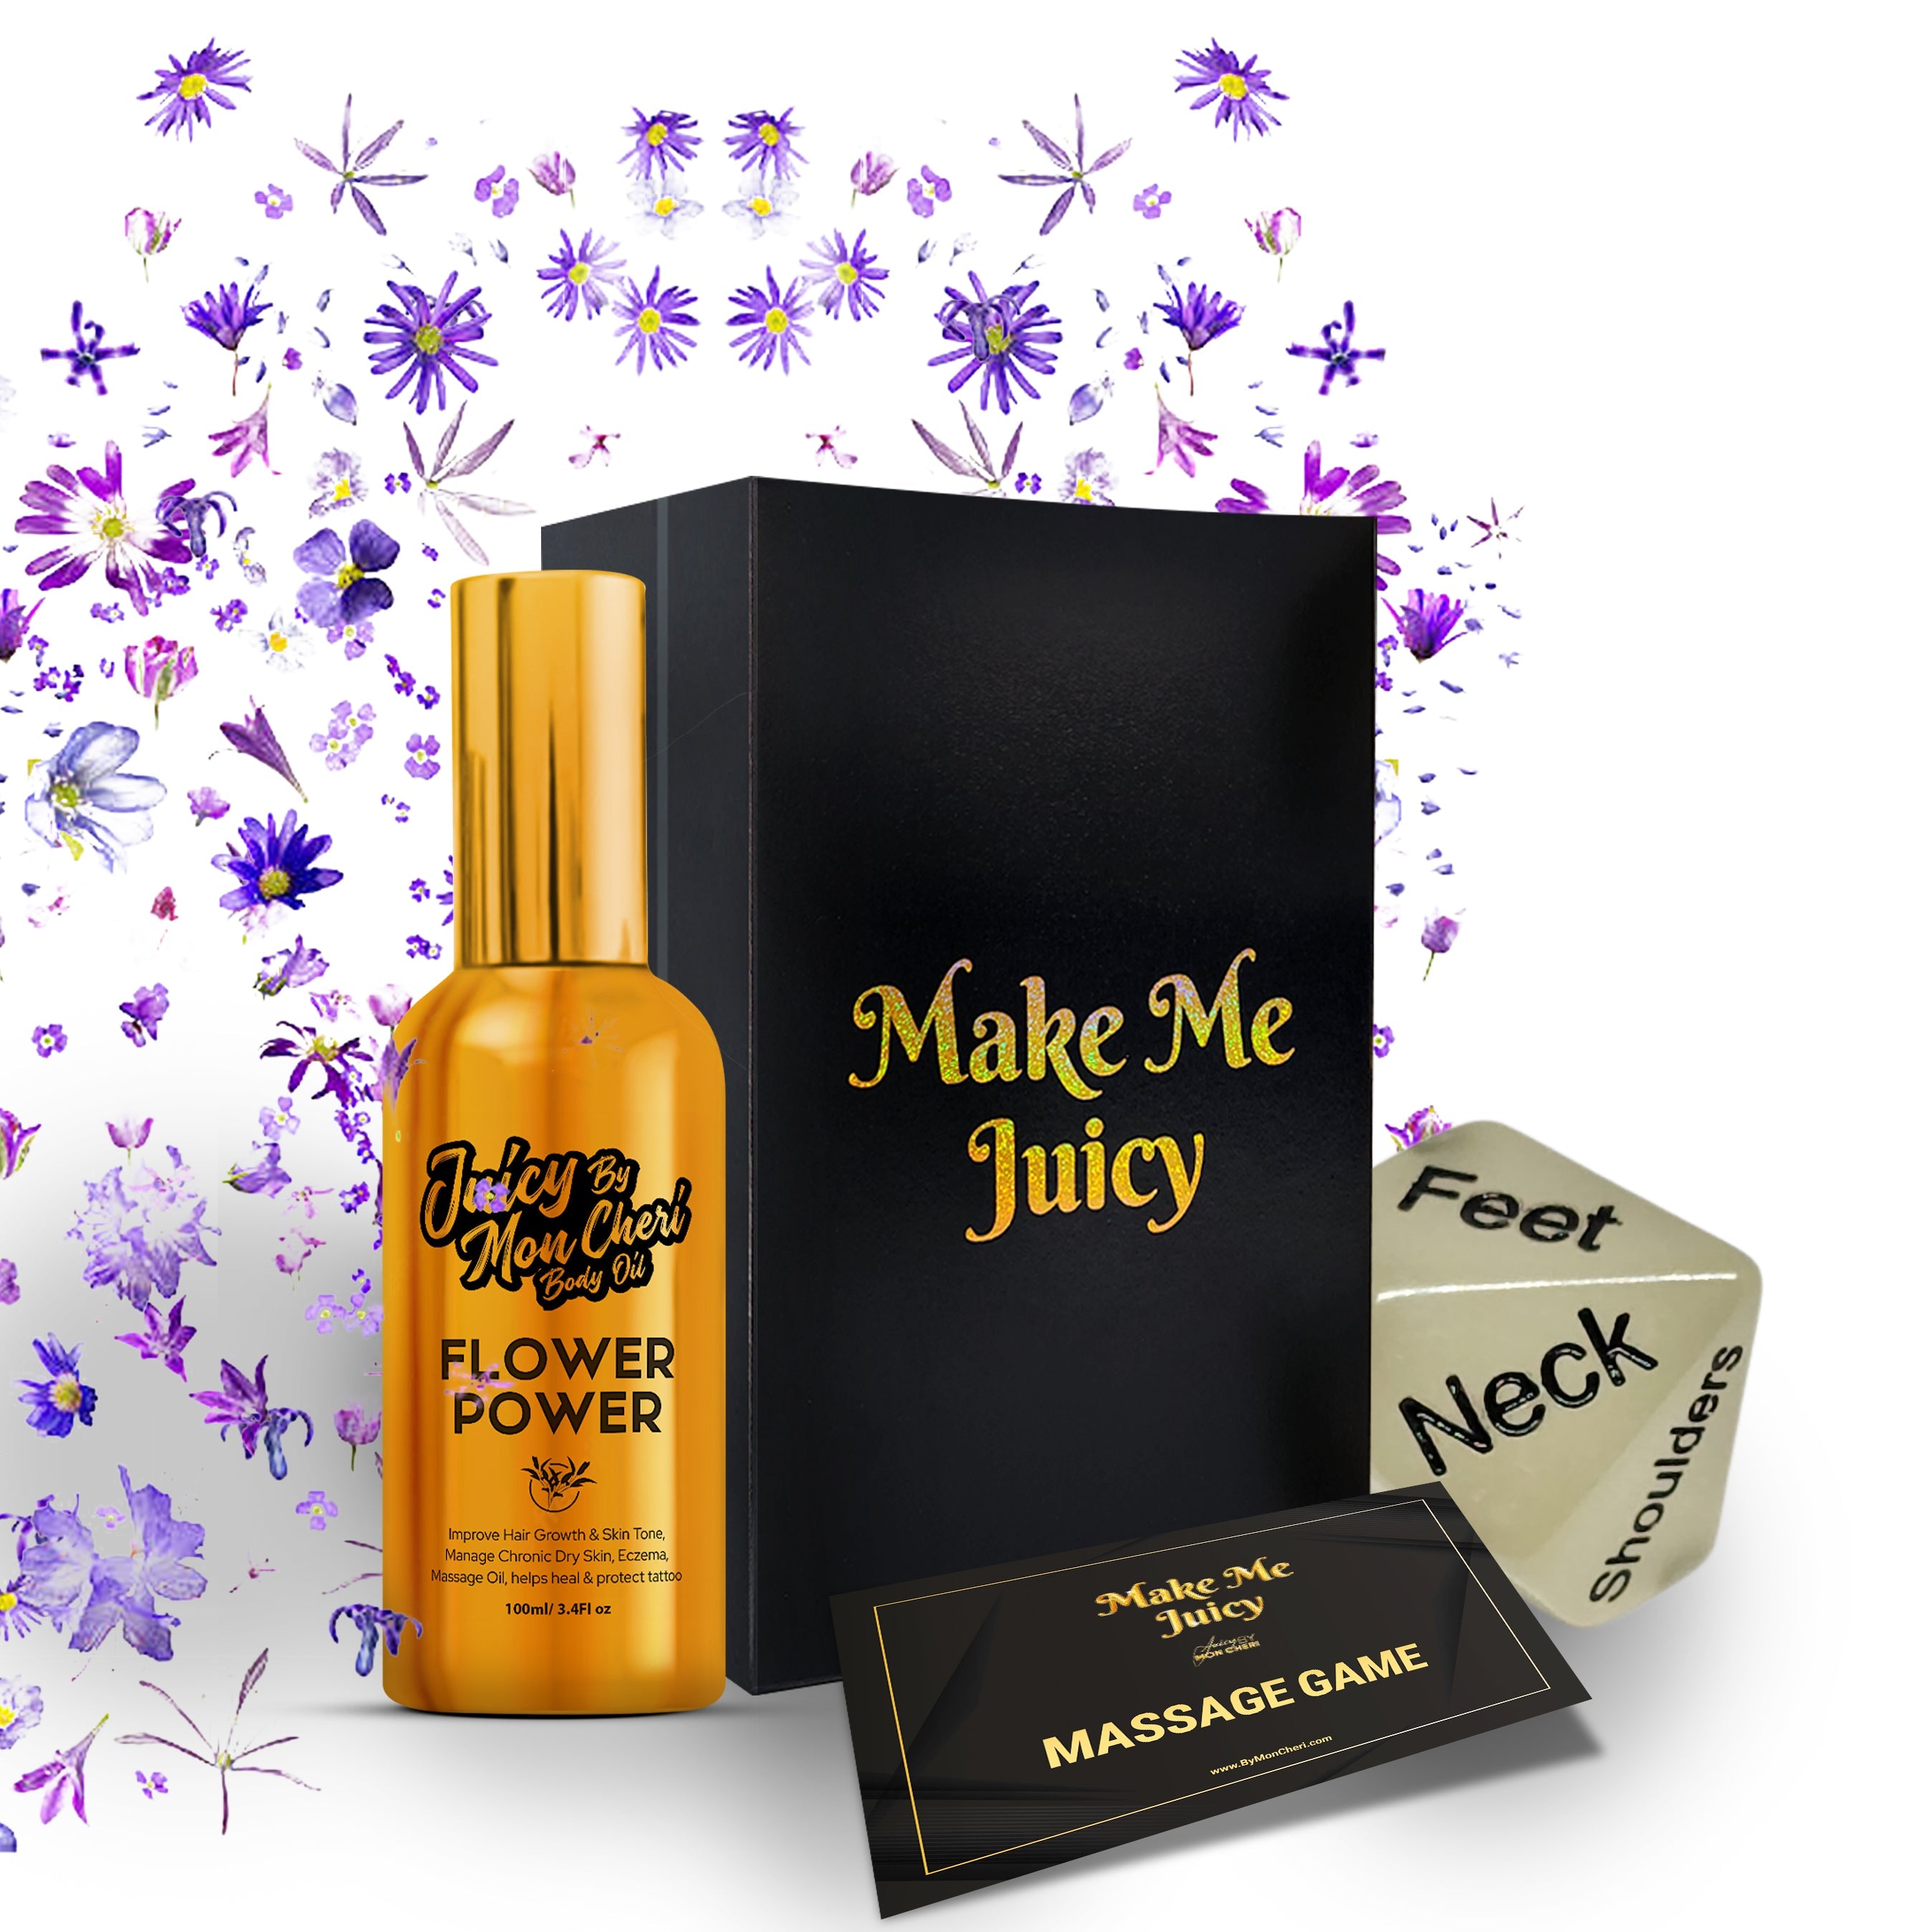 Unleash Intimate Fun with Juicy by Mon Cheri's Couples Massage Oil and Rolling Dice Game